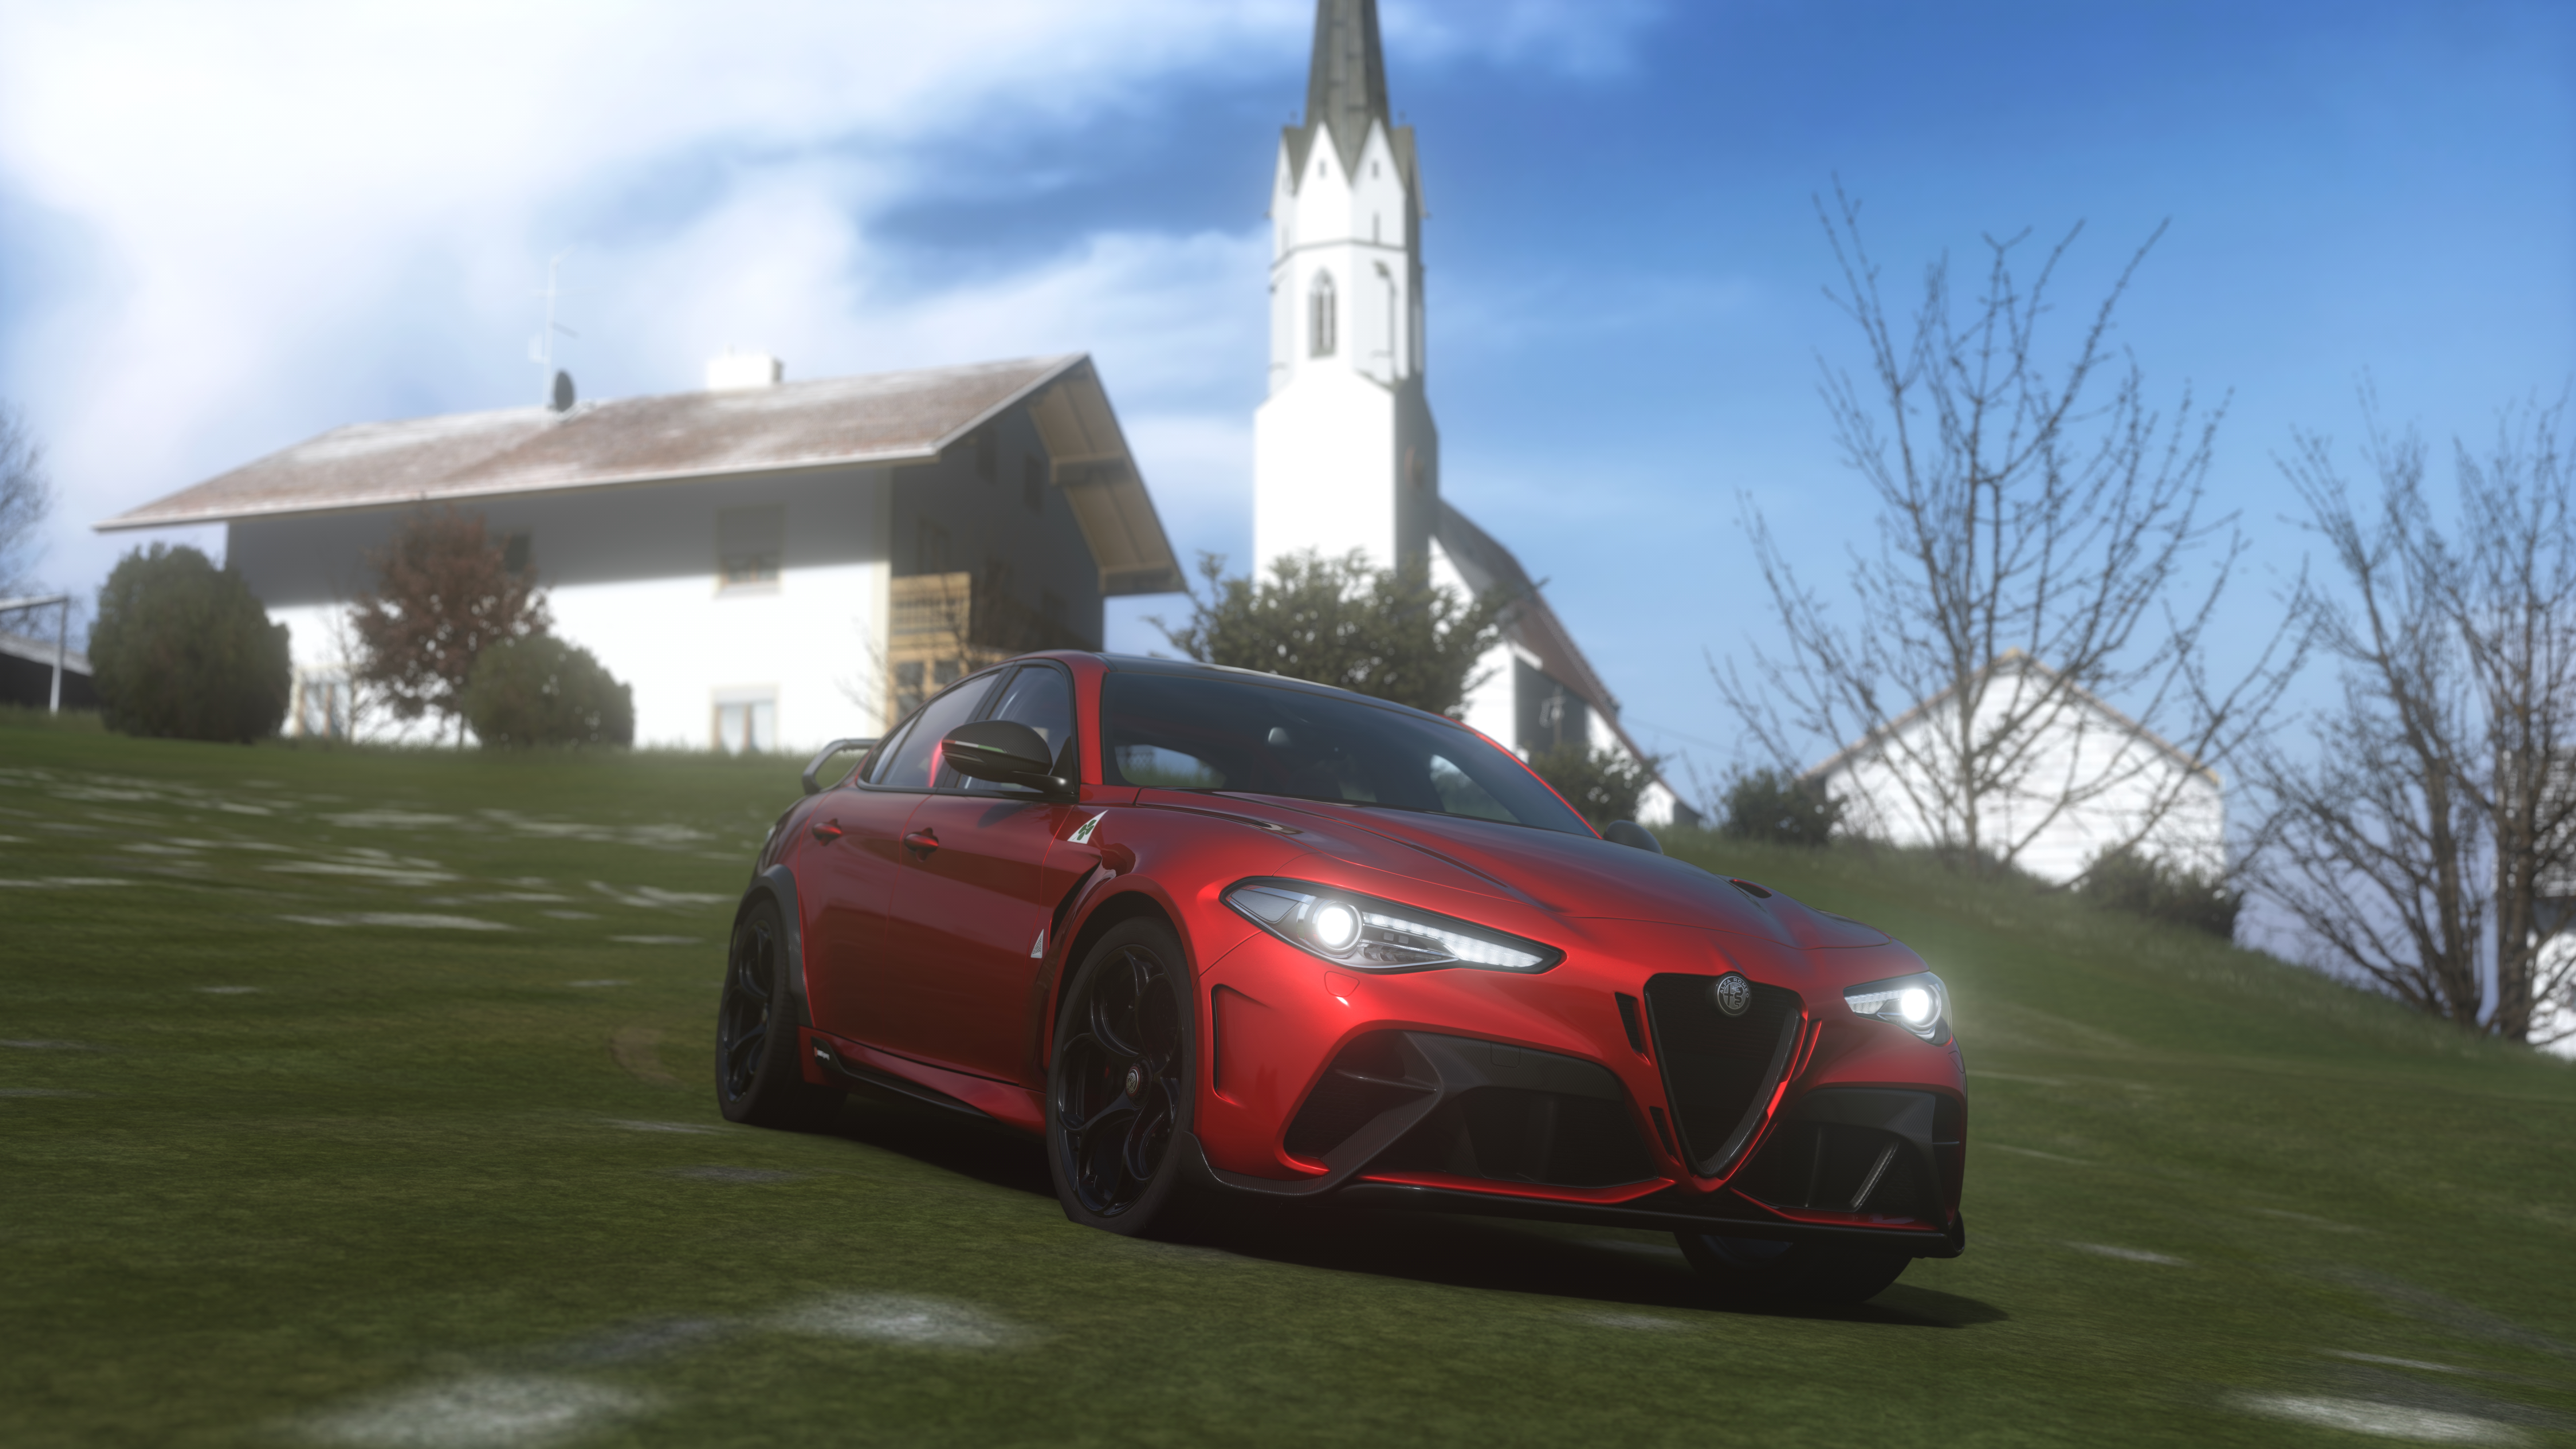 General 7680x4320 Alfa Romeo car Assetto Corsa PC gaming video game art vehicle video games frontal view red cars headlights sky clouds CGI building